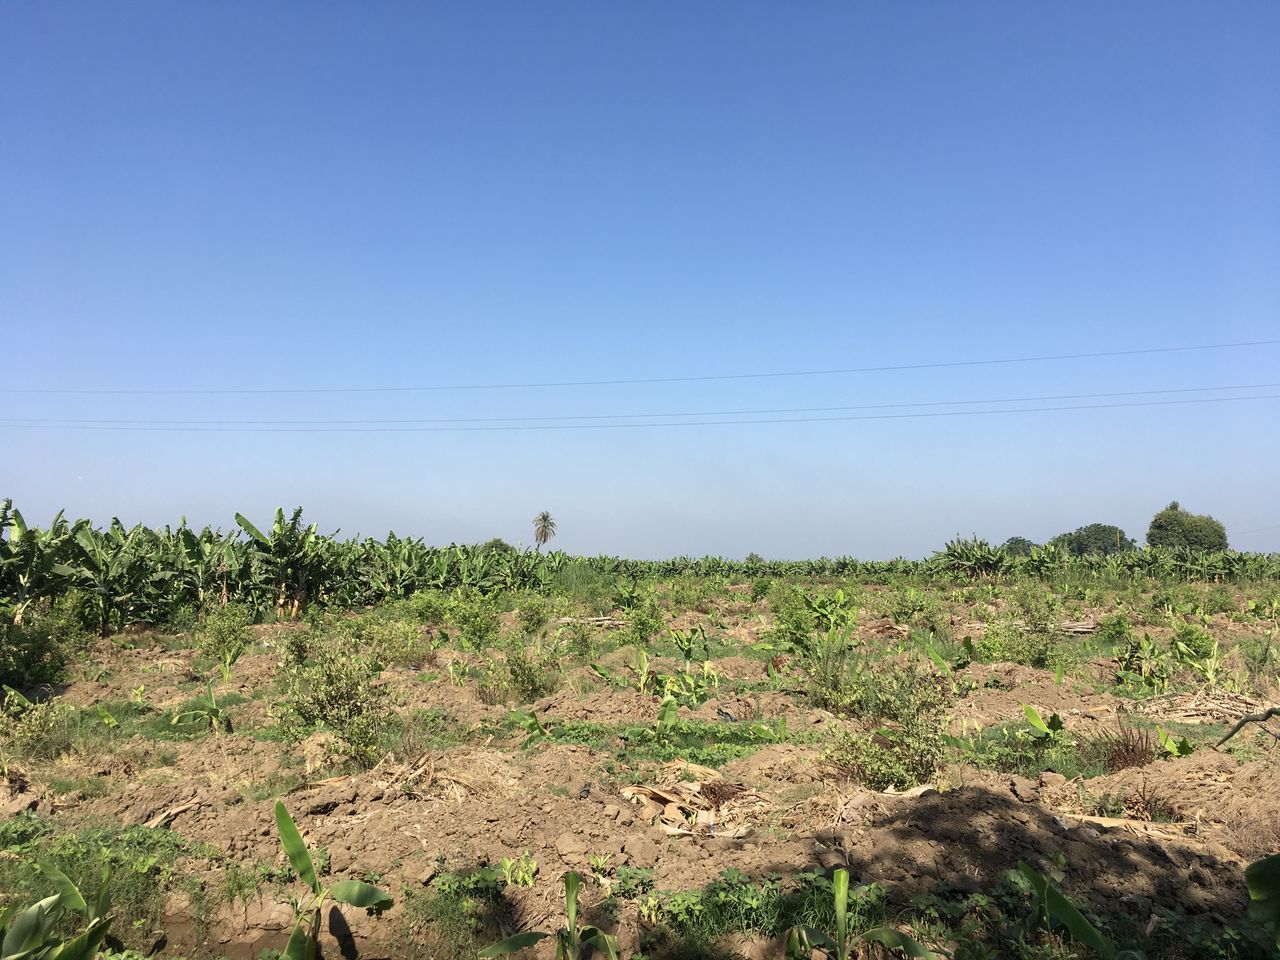 soil, sky, landscape, plant, natural environment, environment, nature, land, field, scenics - nature, blue, clear sky, hill, no people, rural area, agriculture, tree, day, growth, beauty in nature, tranquility, rural scene, outdoors, copy space, non-urban scene, tranquil scene, grass, horizon, sunny